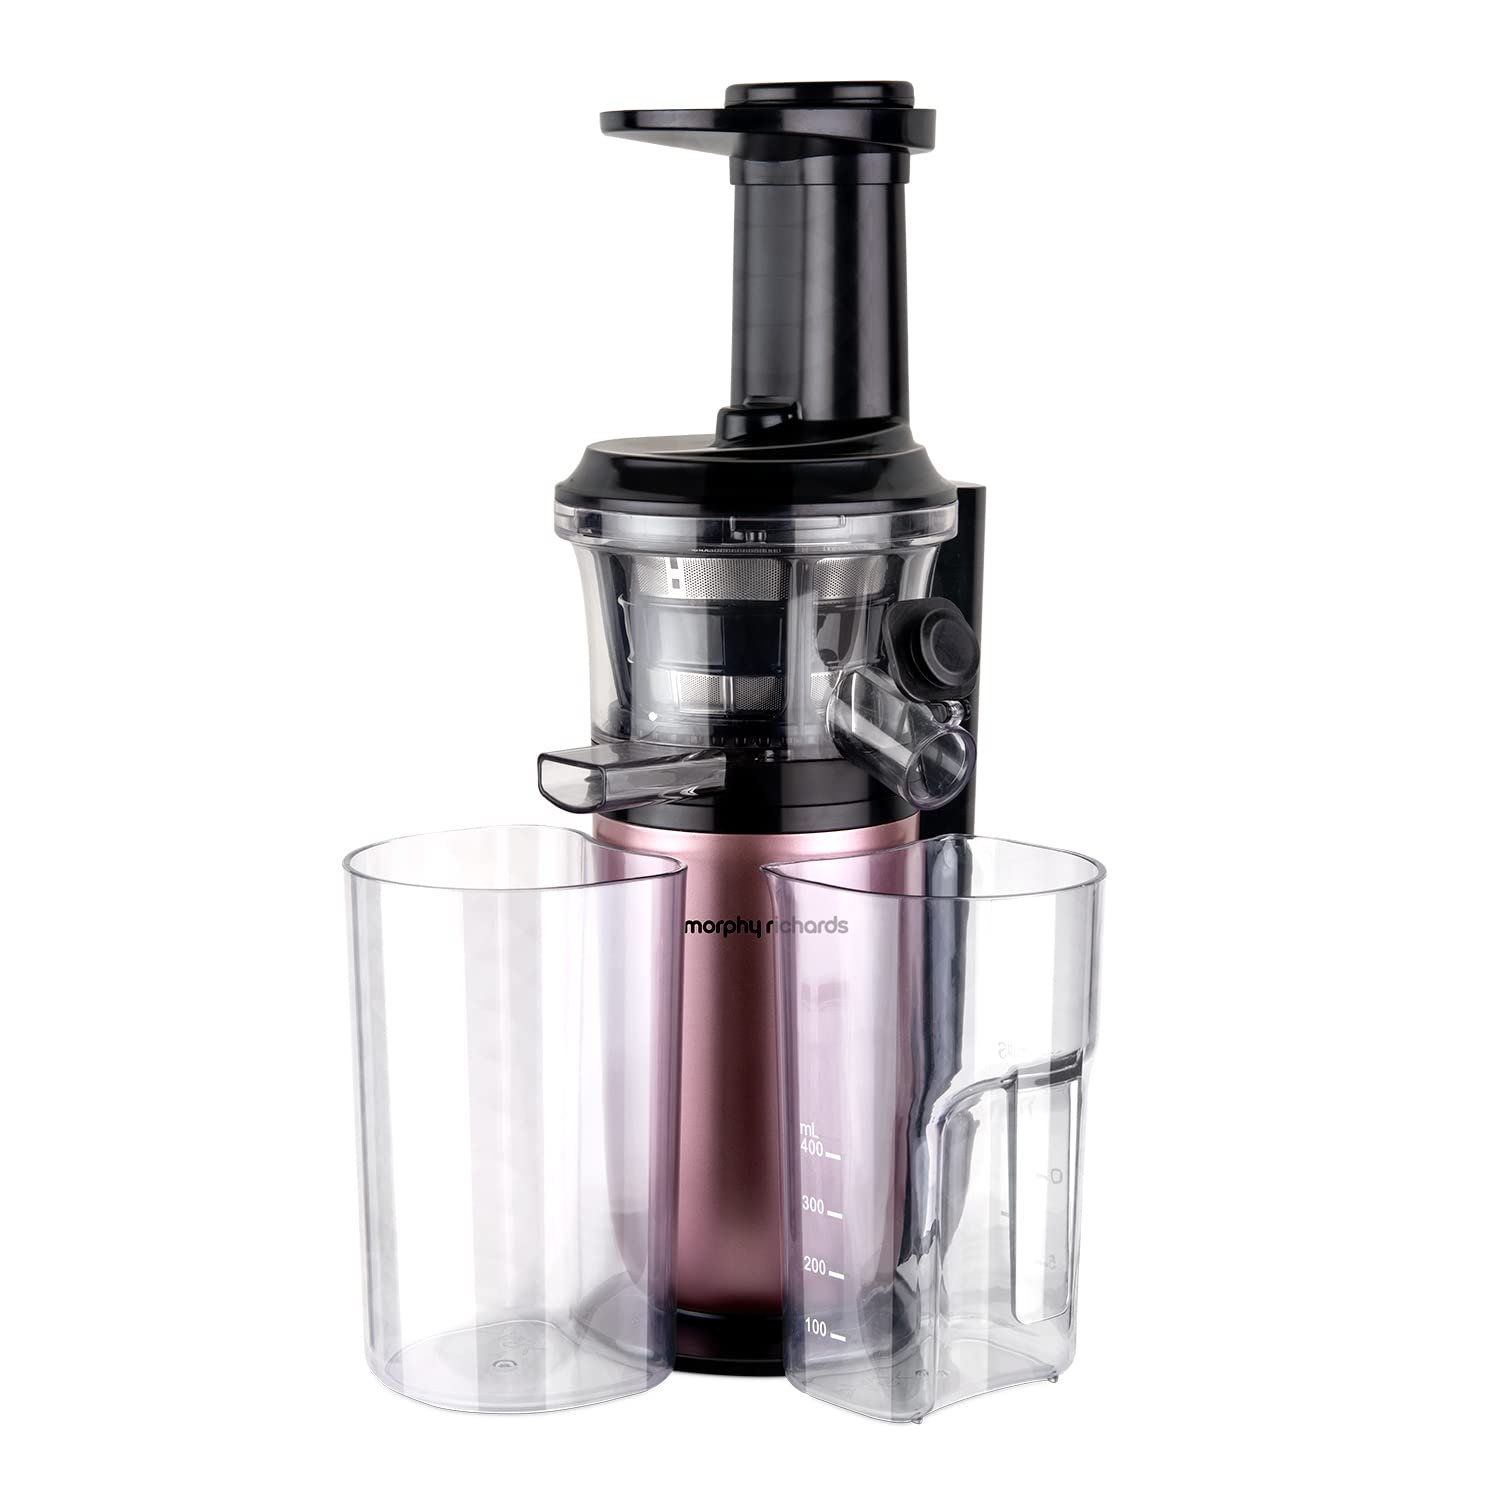 Morphy Richards Kenzo Cold Press Slow Juicer, 150 W Powerful DC Motor, 60 RPM Speed